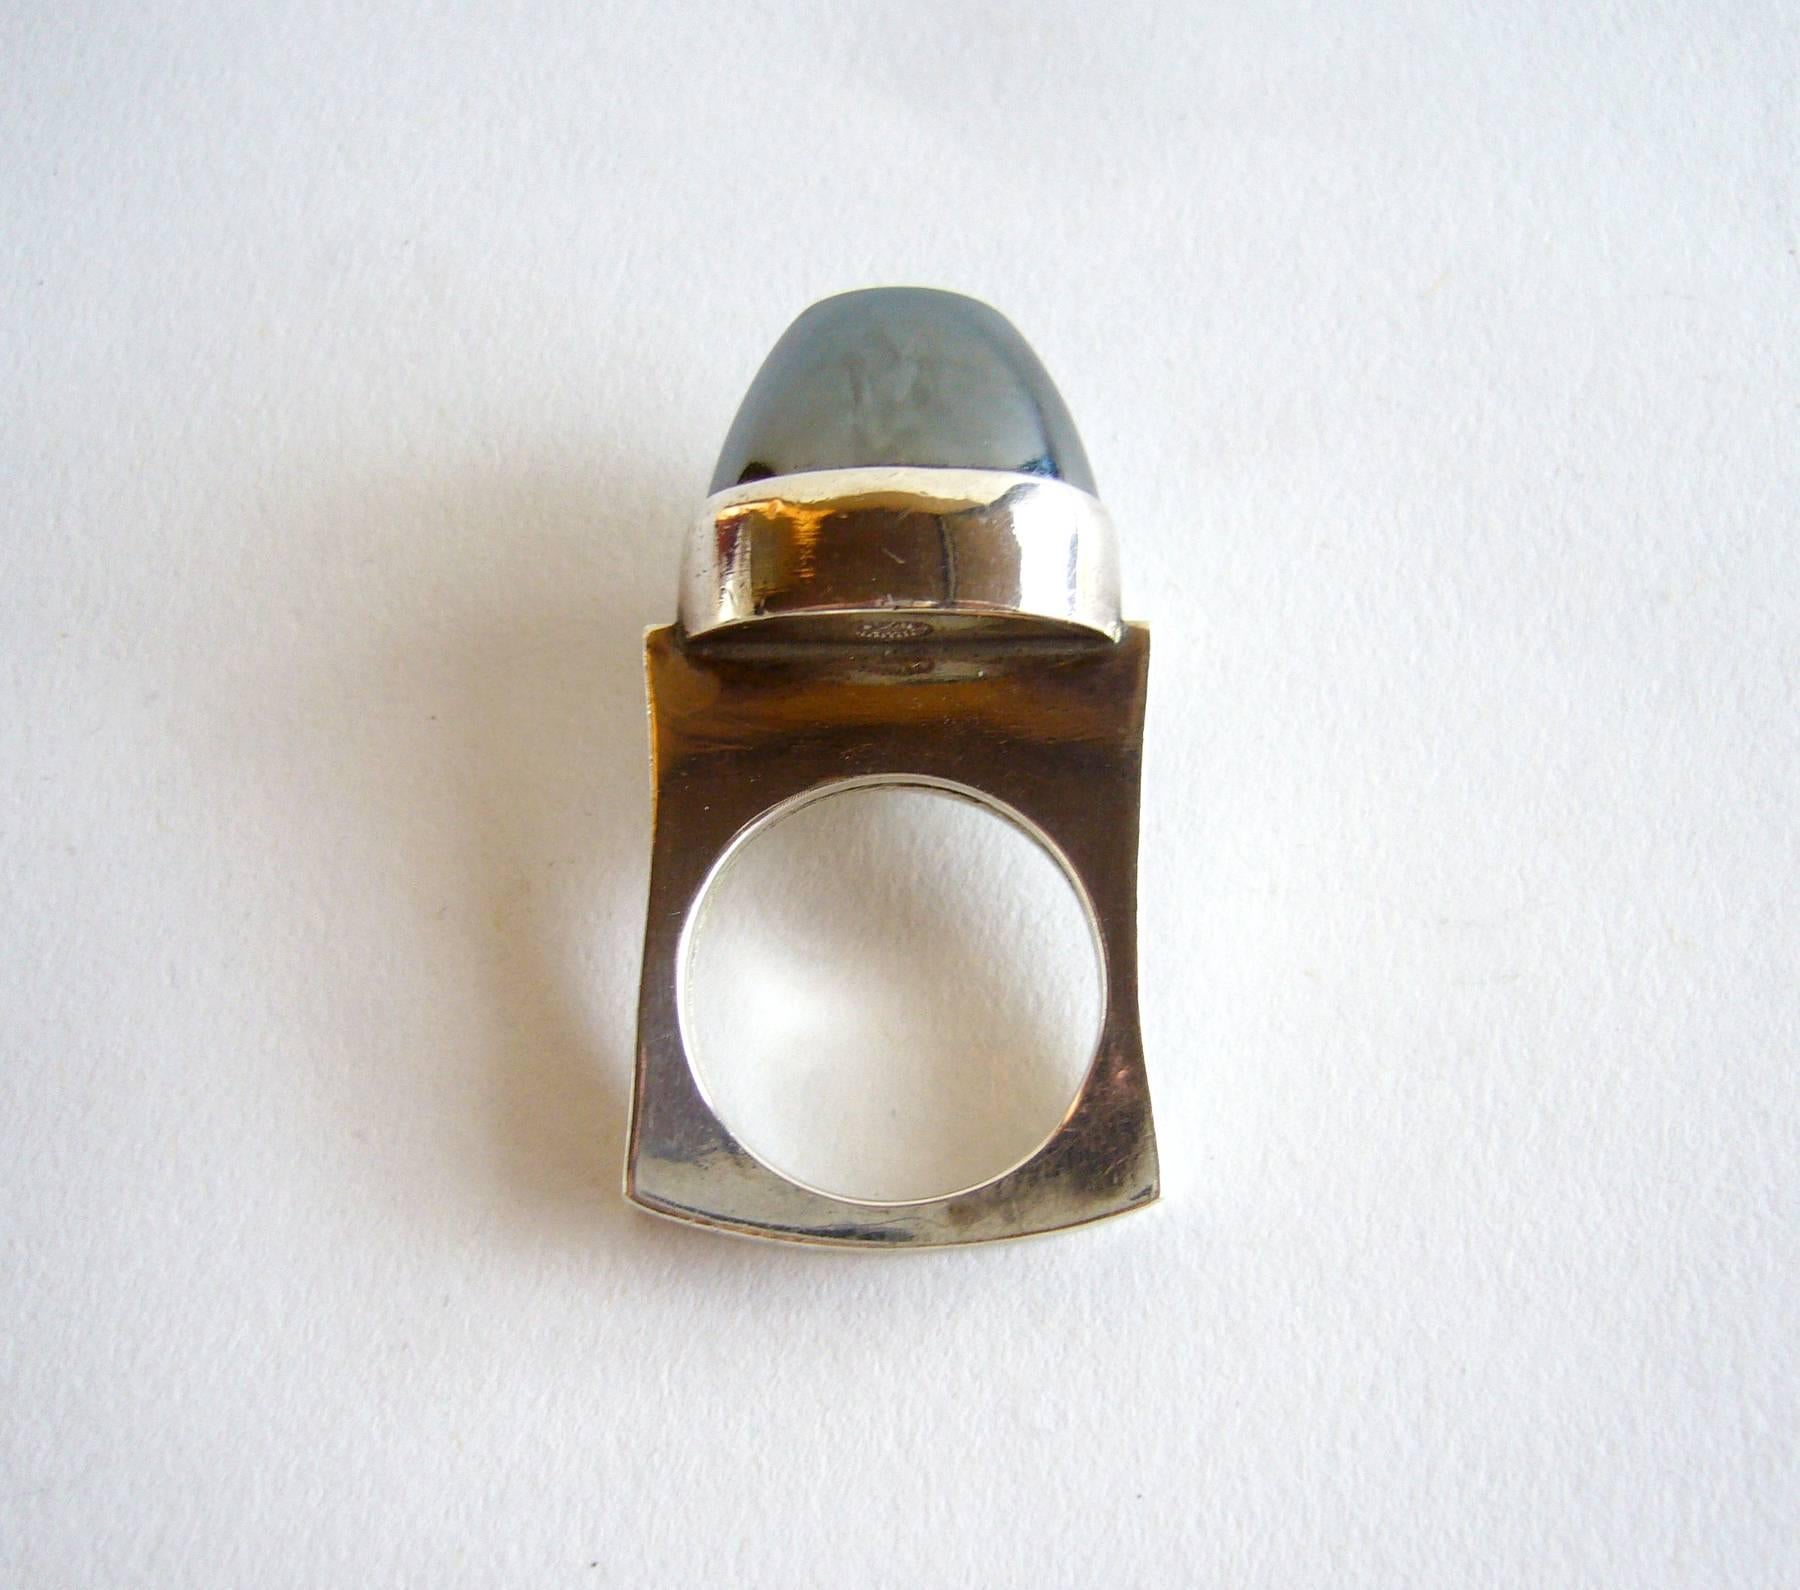 Sterling silver and hematite ring created by Danish modernist jeweler Andreas Mikkelsen for Georg Jensen.  Ring is a finger size 6.5 and is signed Georg Jensen, Denmark, 89A.  In excellent vintage condition.